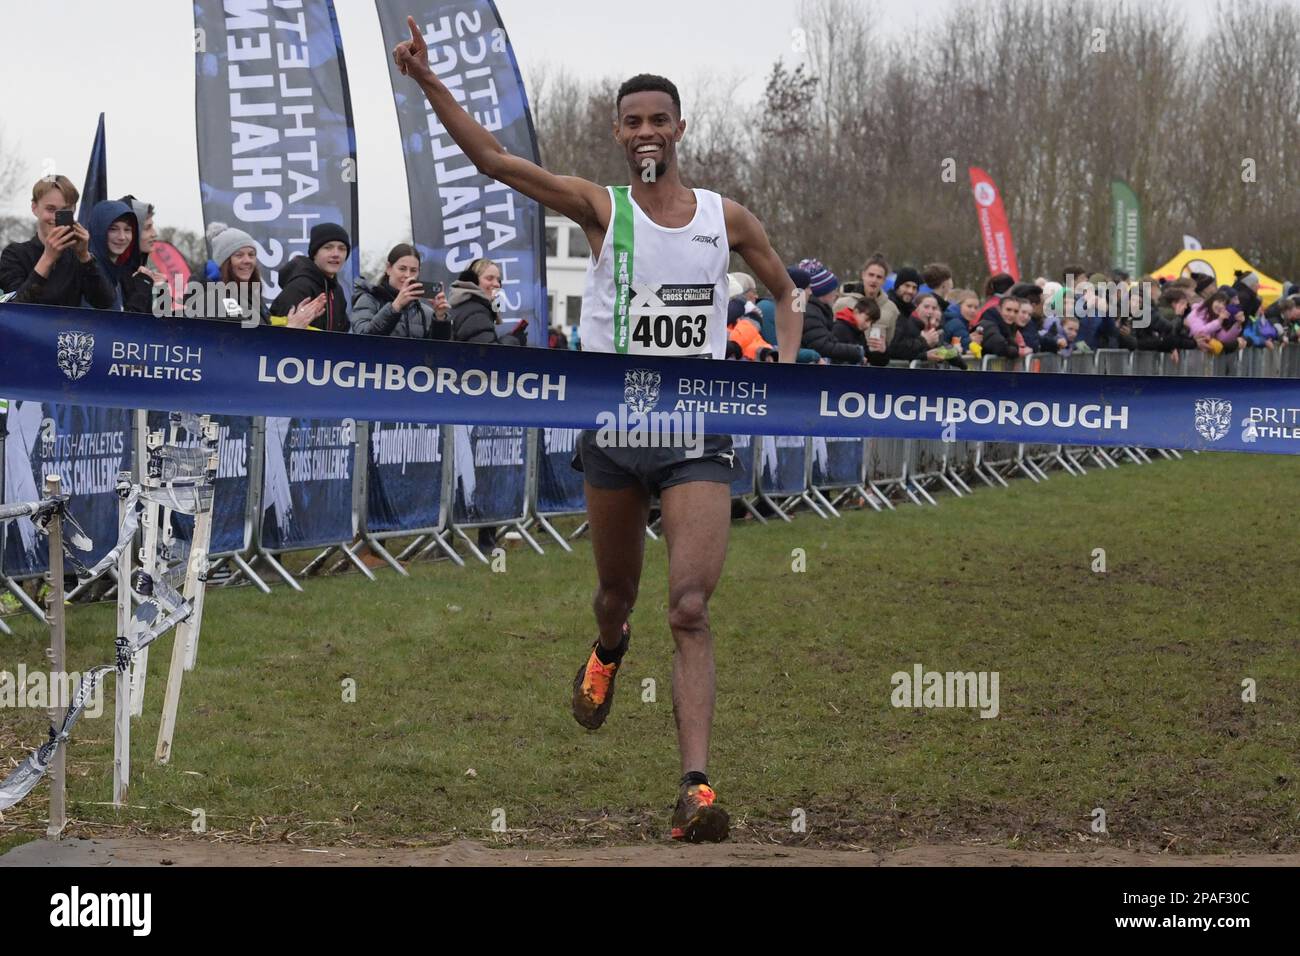 Loughborough, UK. Saturday, 11th March 2023. Cloudy. Mahamed Mahamed, no. 4063, representing Hampshire inter county team, wins senior men, UK Counties Athletic Union 2023 UK inter counties cross country championships and British athletics Cross Challenge, the 5th stage, final race at Prestwold Hall, Loughborough. © Yoko Shelley Credit: Yoko Shelley/Alamy Live News Stock Photo